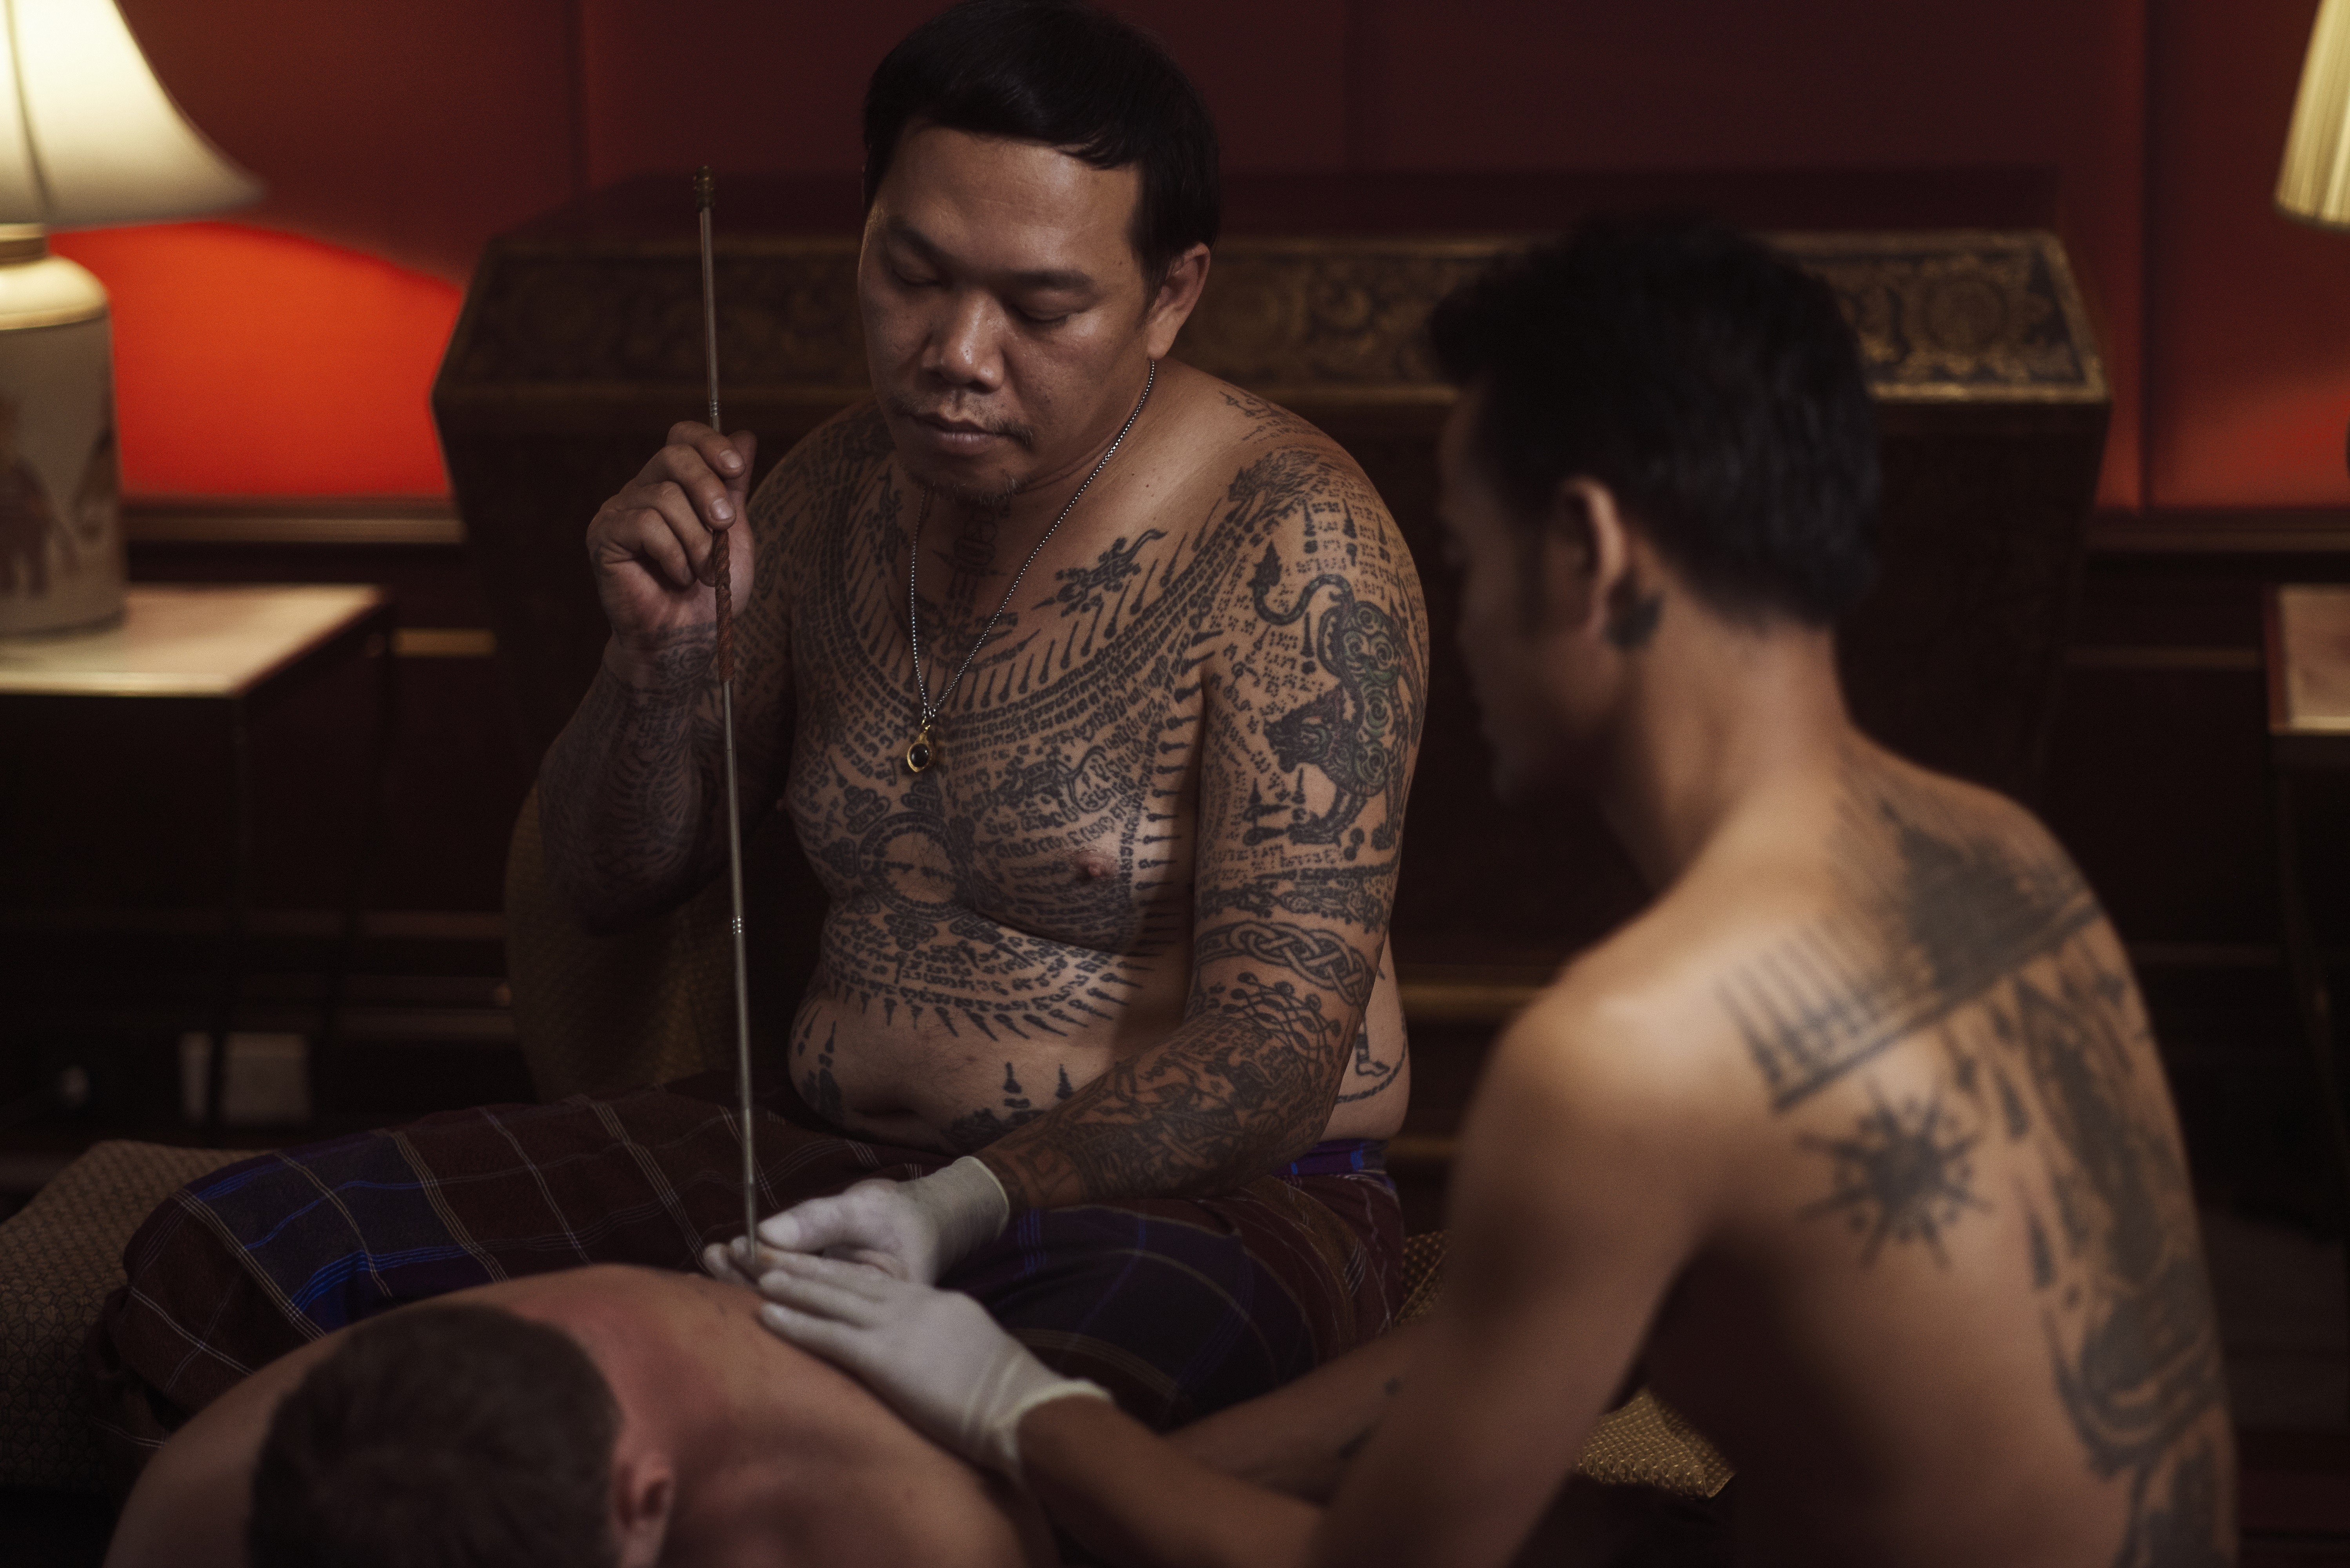 The Anantara Siam Bangkok Hotel is offering an in-house sak yant session with traditional Thai tattoo artist Ajarn Neng Onnut, who has inked Angelina Jolie and Brad Pitt.